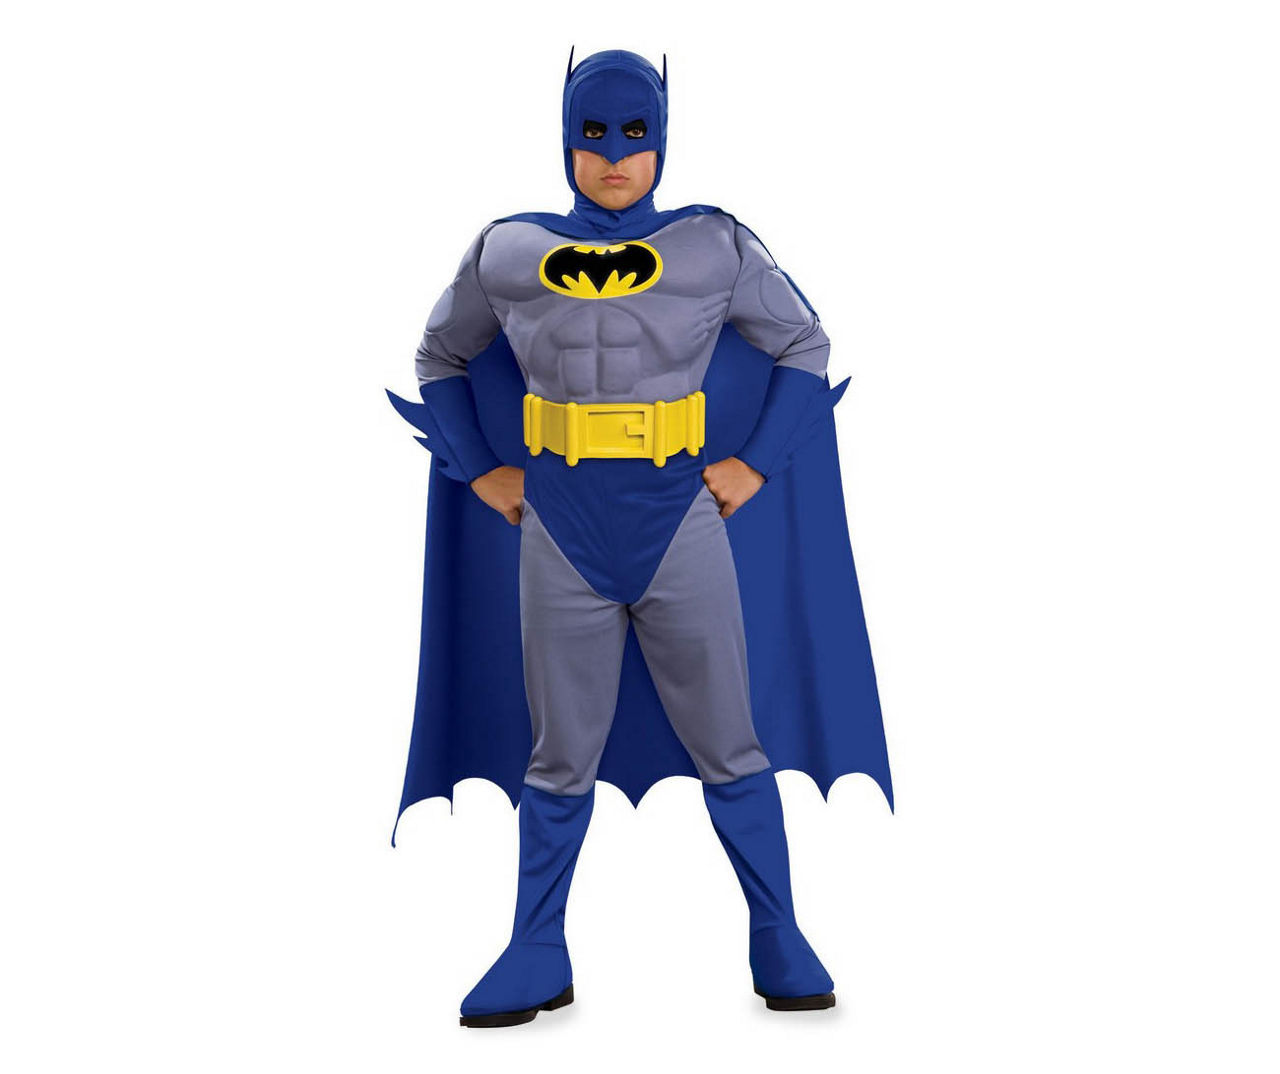 Kids Size S The Brave & The Bold Deluxe Muscle Chest Batman Costume